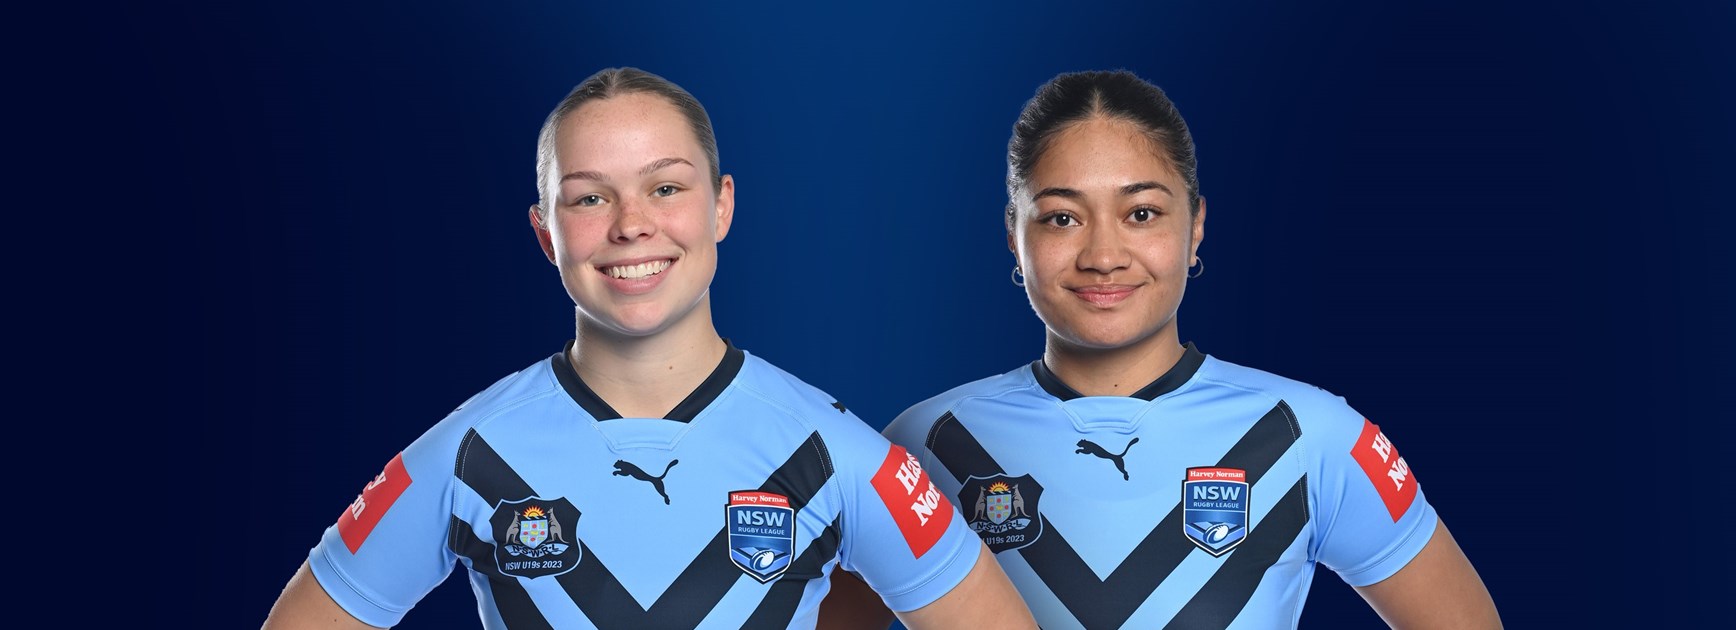 Co-captains are keen for another NSW win